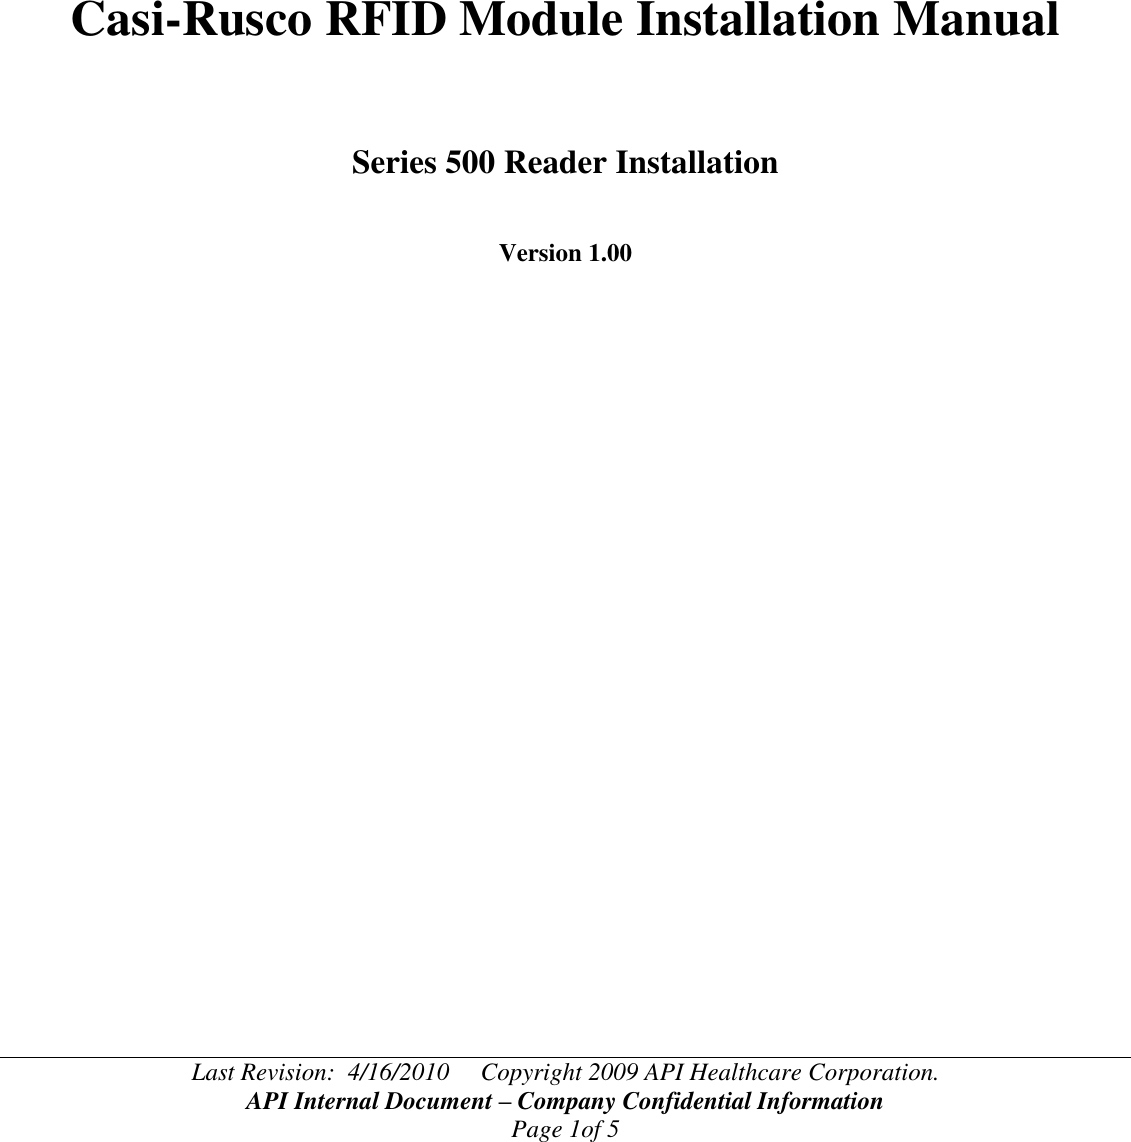 Last Revision:  4/16/2010     Copyright 2009 API Healthcare Corporation. API Internal Document – Company Confidential Information Page 1of 5       Casi-Rusco RFID Module Installation Manual    Series 500 Reader Installation   Version 1.00          